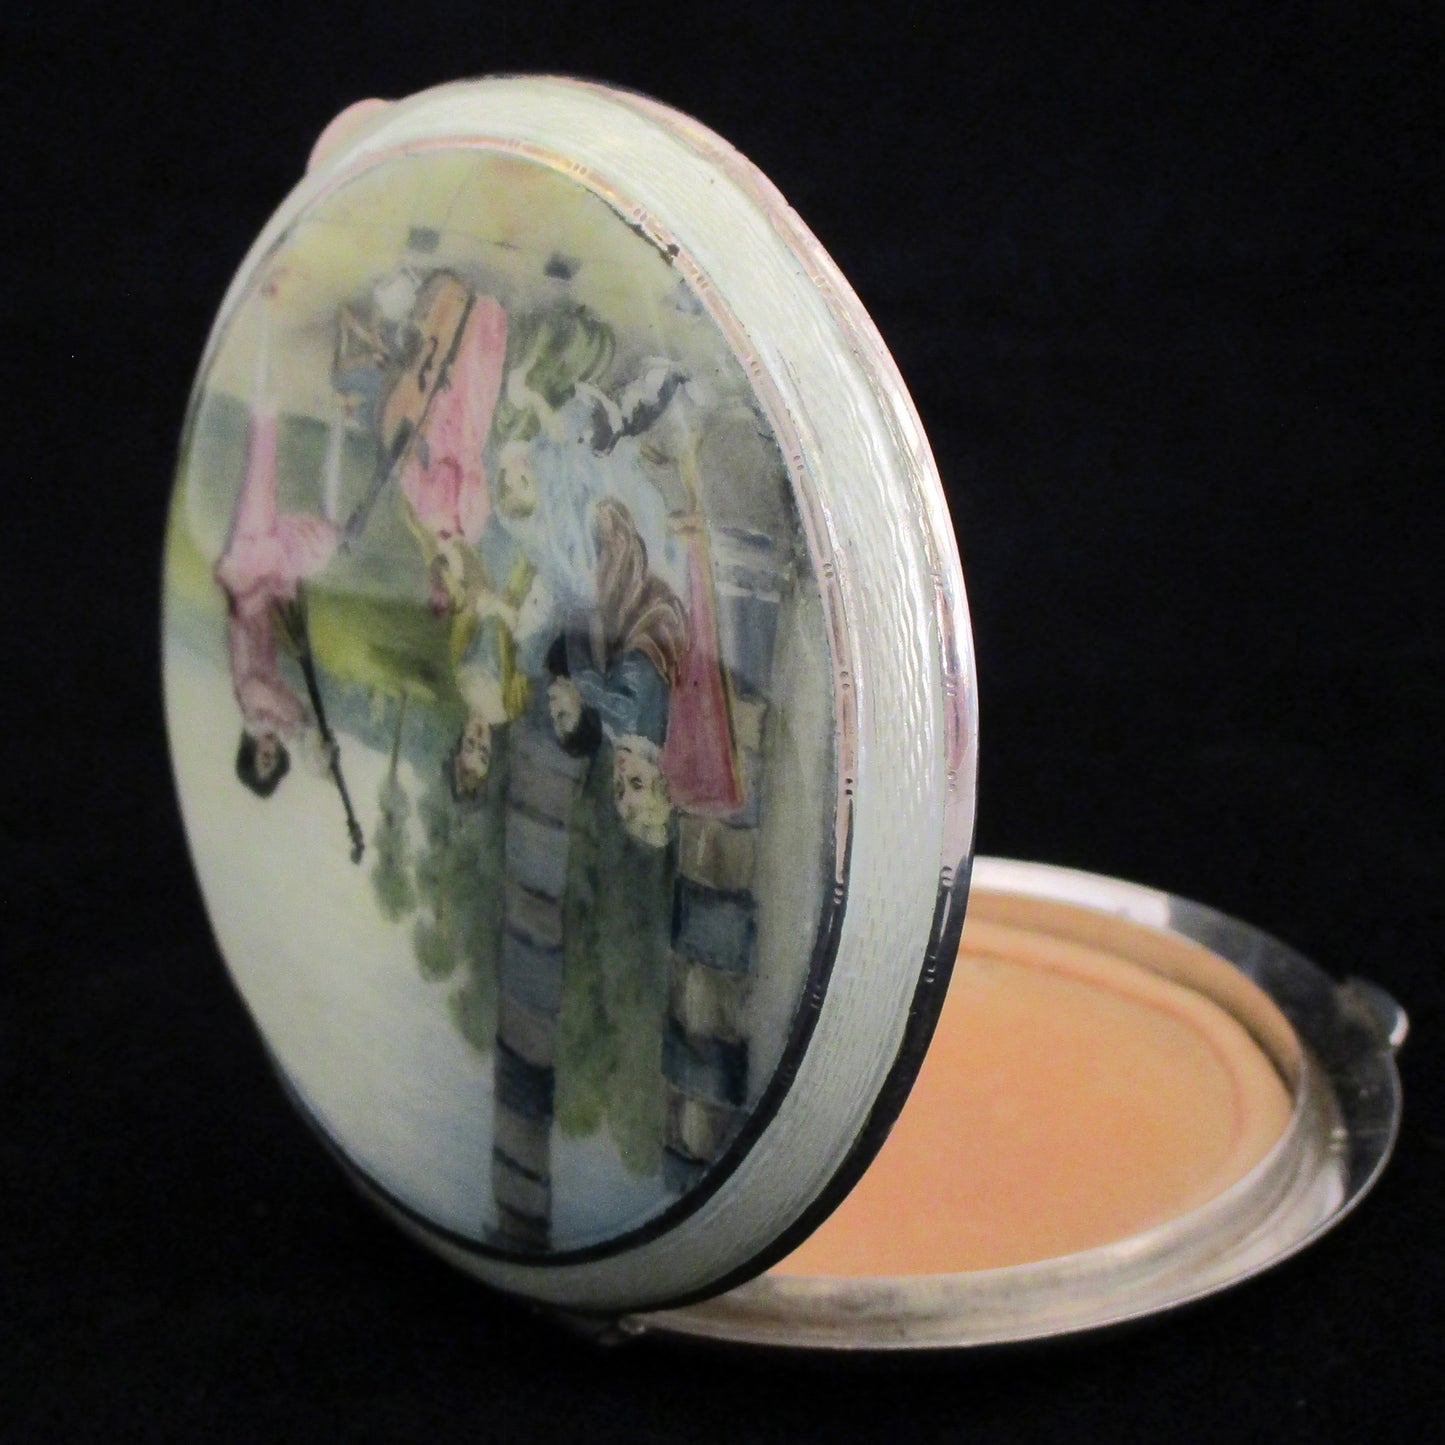 sterling silver hand painted compact